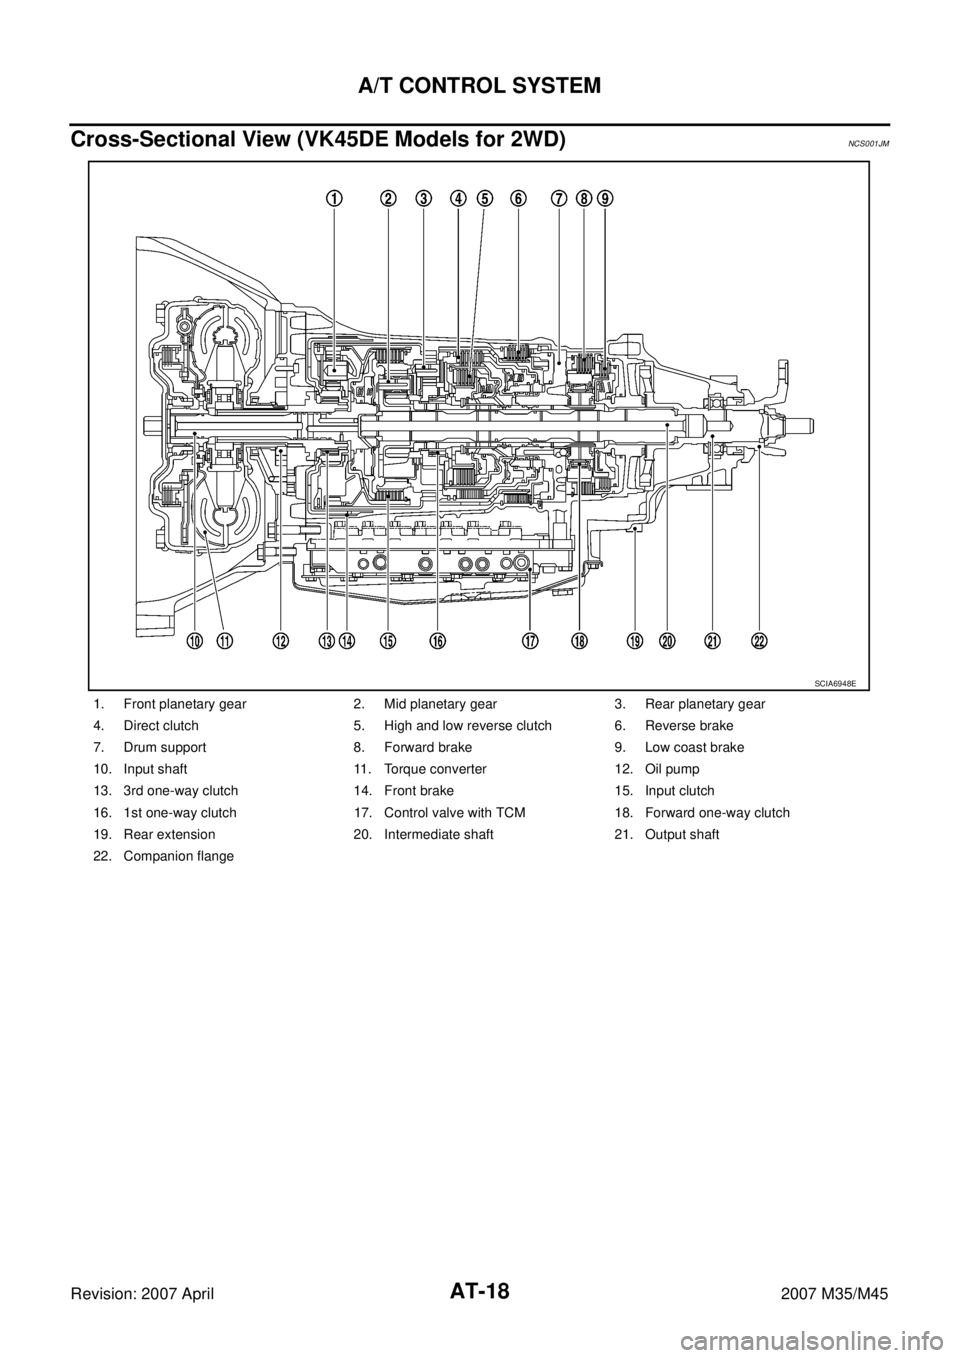 INFINITI M35 2007  Factory Service Manual AT-18
A/T CONTROL SYSTEM
Revision: 2007 April2007 M35/M45
Cross-Sectional View (VK45DE Models for 2WD)NCS001JM
1. Front planetary gear 2. Mid planetary gear 3. Rear planetary gear
4. Direct clutch 5. 